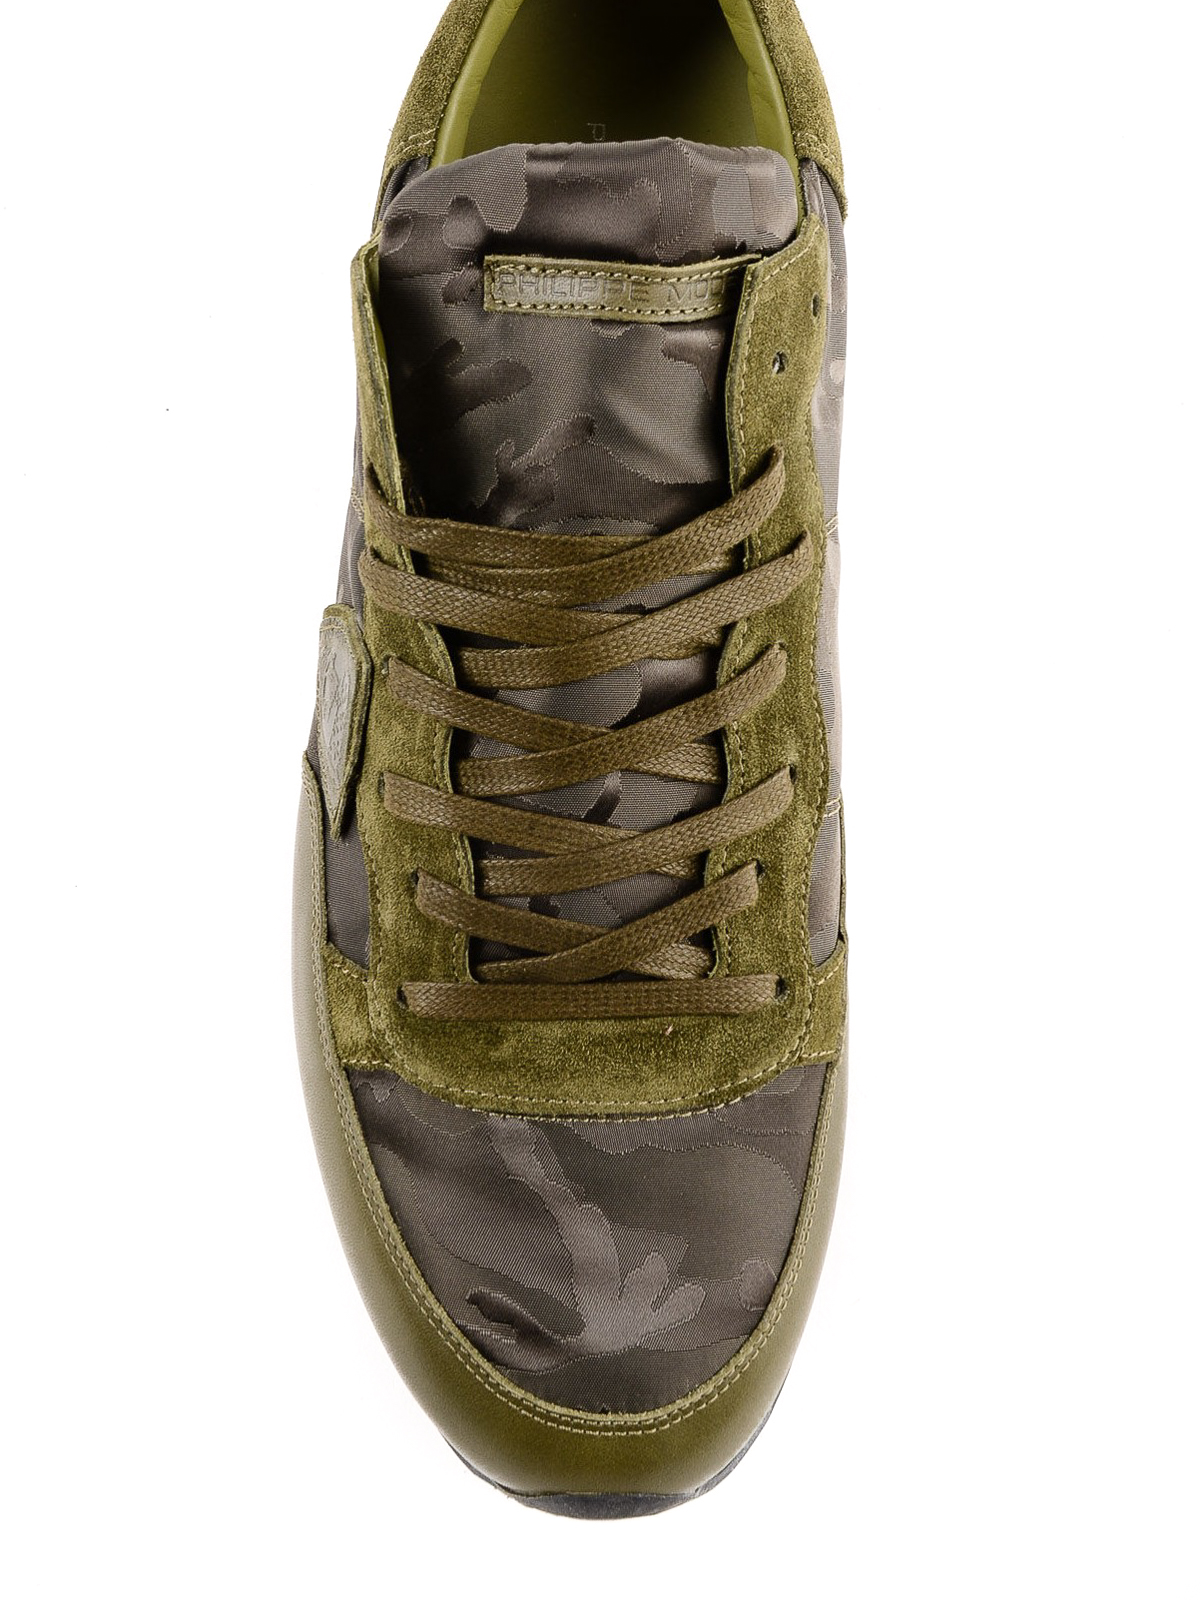 Mens Trainers Philippe Model Trainers for Men Green Philippe Model Leather Trpx Neon Sneakers in Camouflage Save 34% 